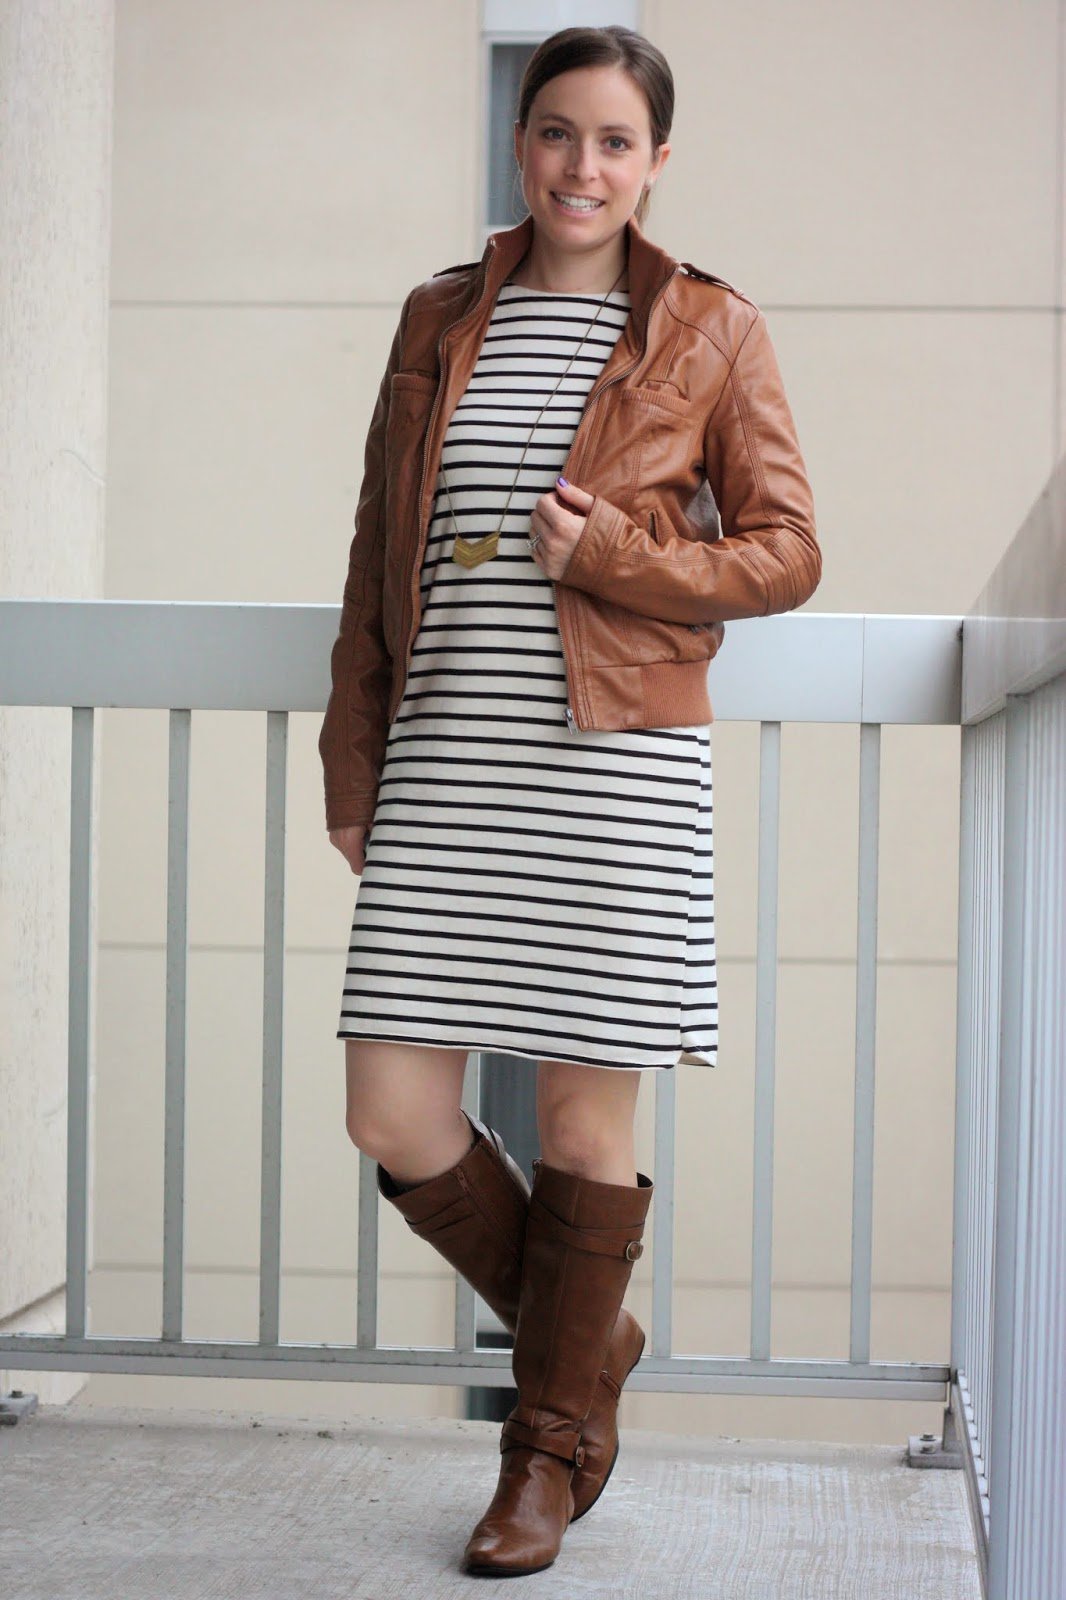 Black and white striped sheath dress, cognac leather jacket and boots for fall | business casual transitions to weekend | www.honestlymodern.com